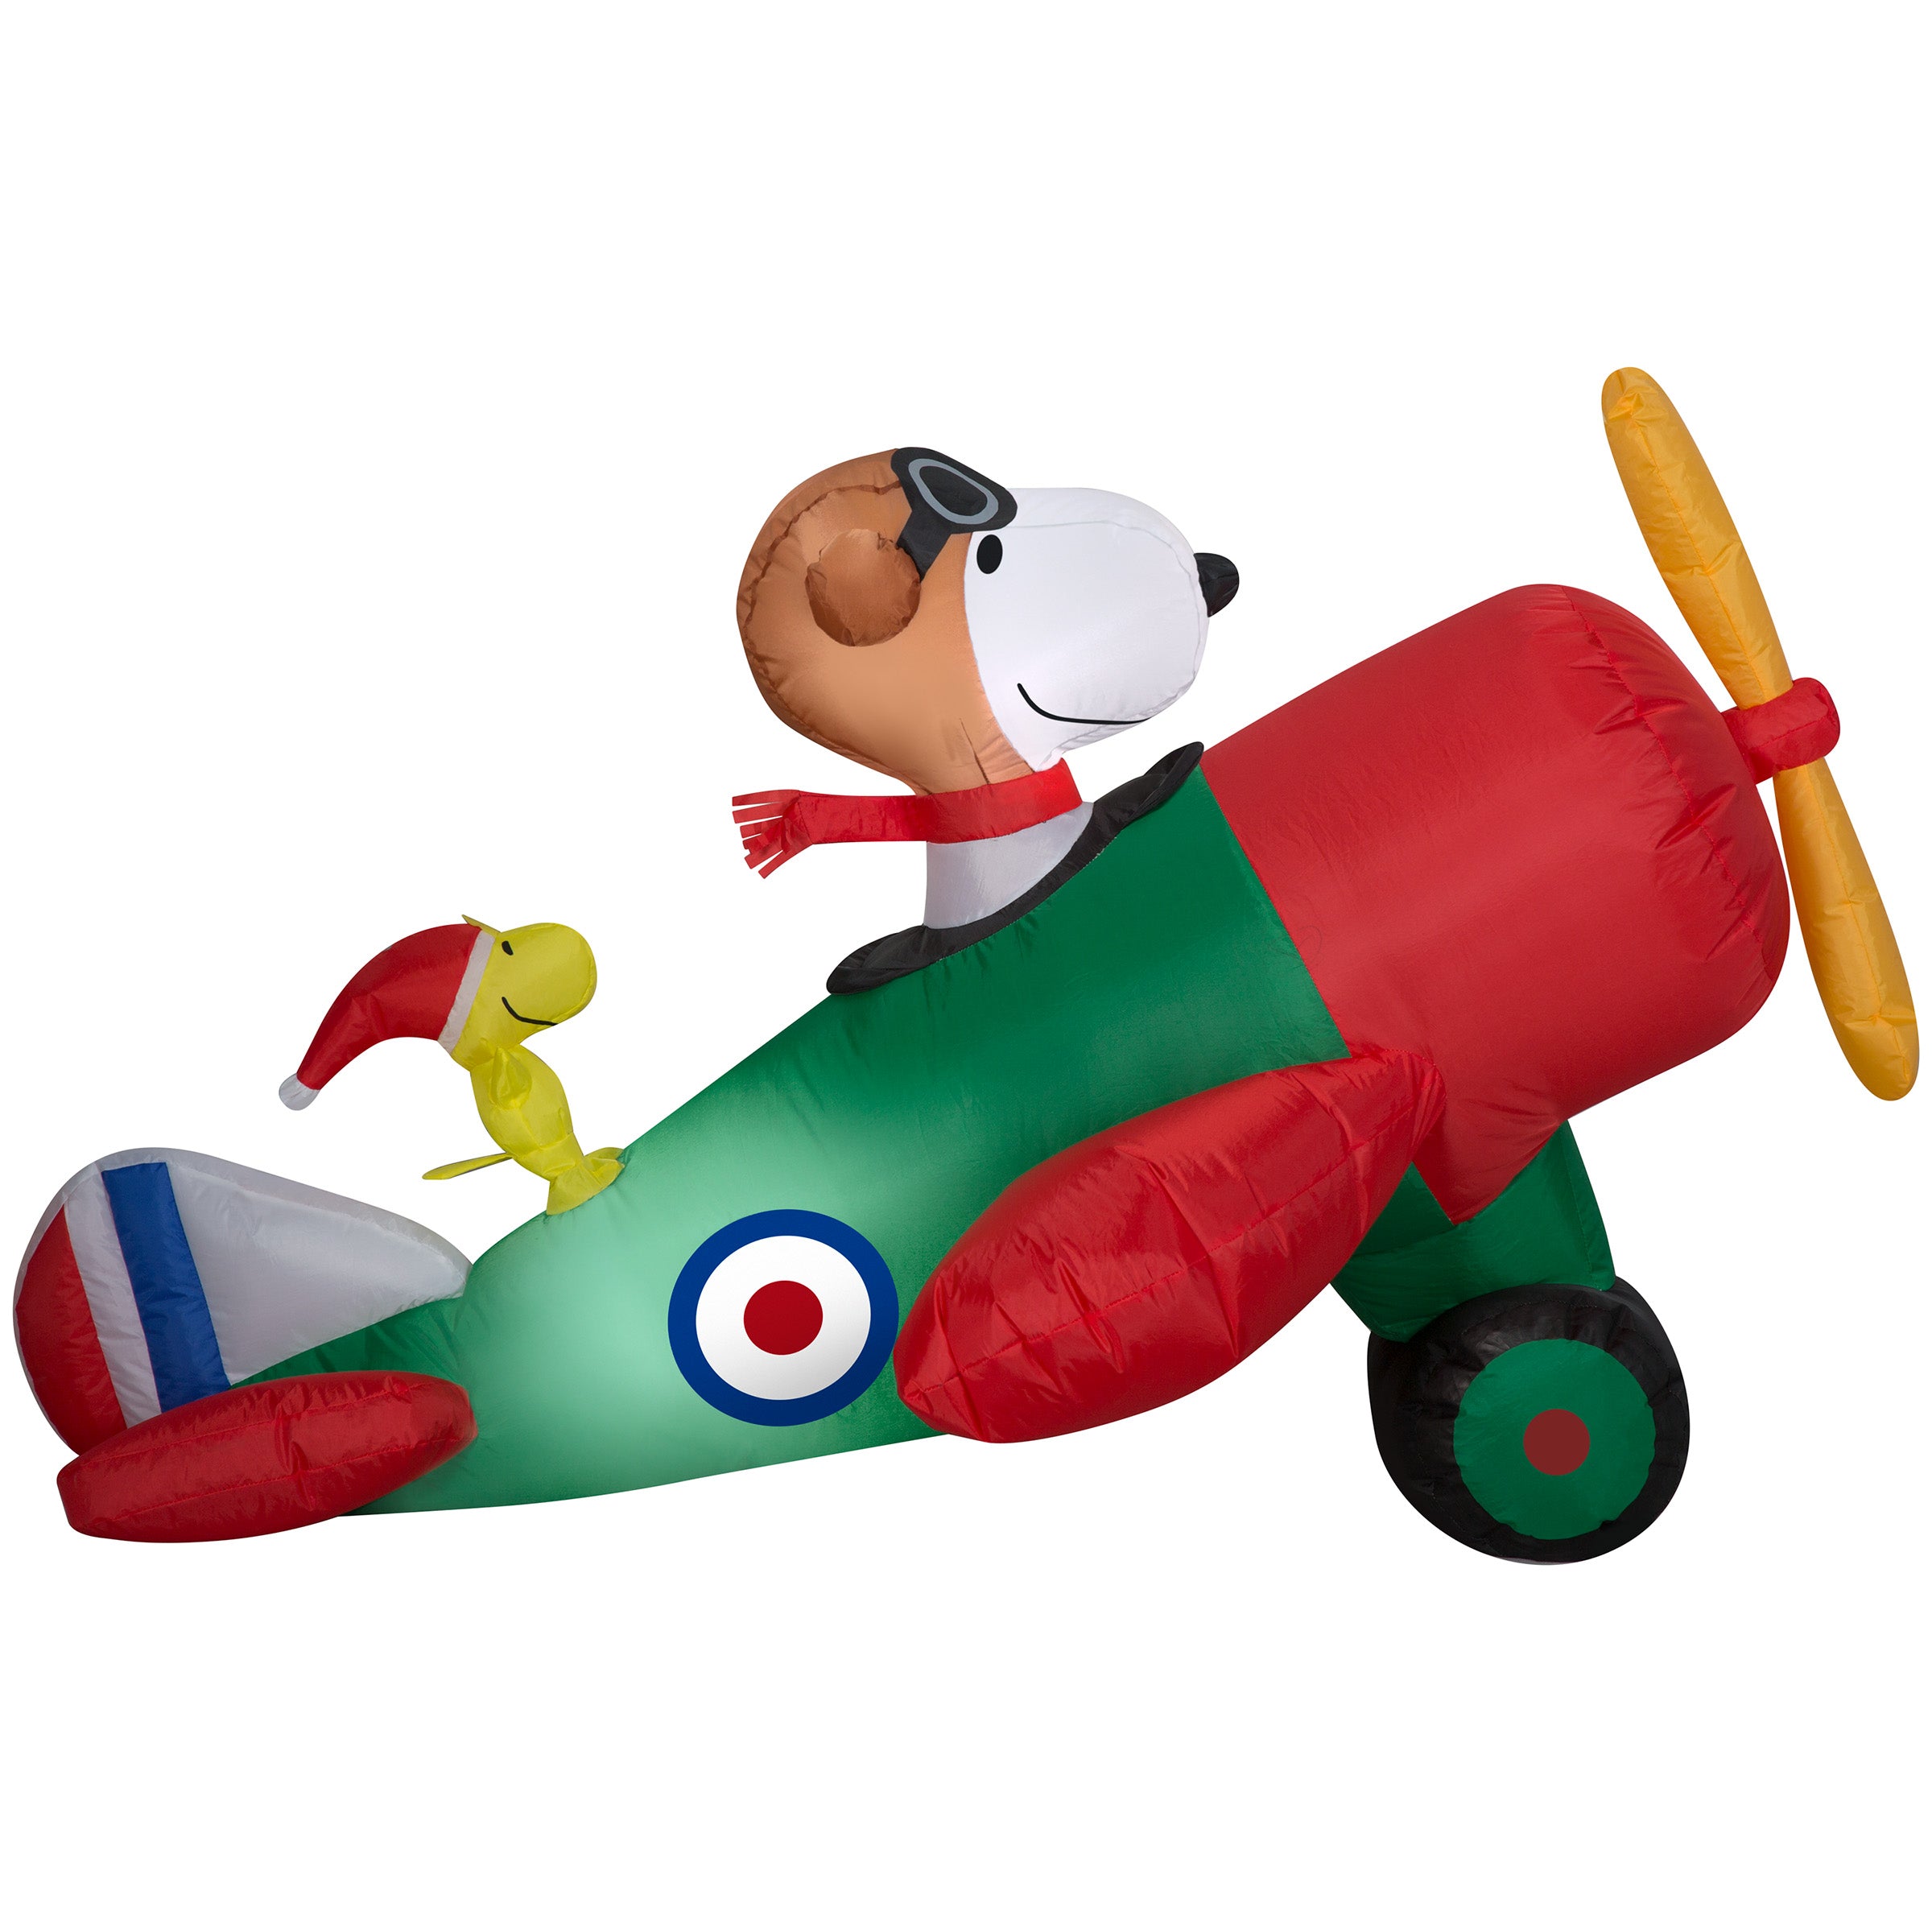 Gemmy Christmas Airblown Inflatable 4.5' Snoopy in Airplane Scene